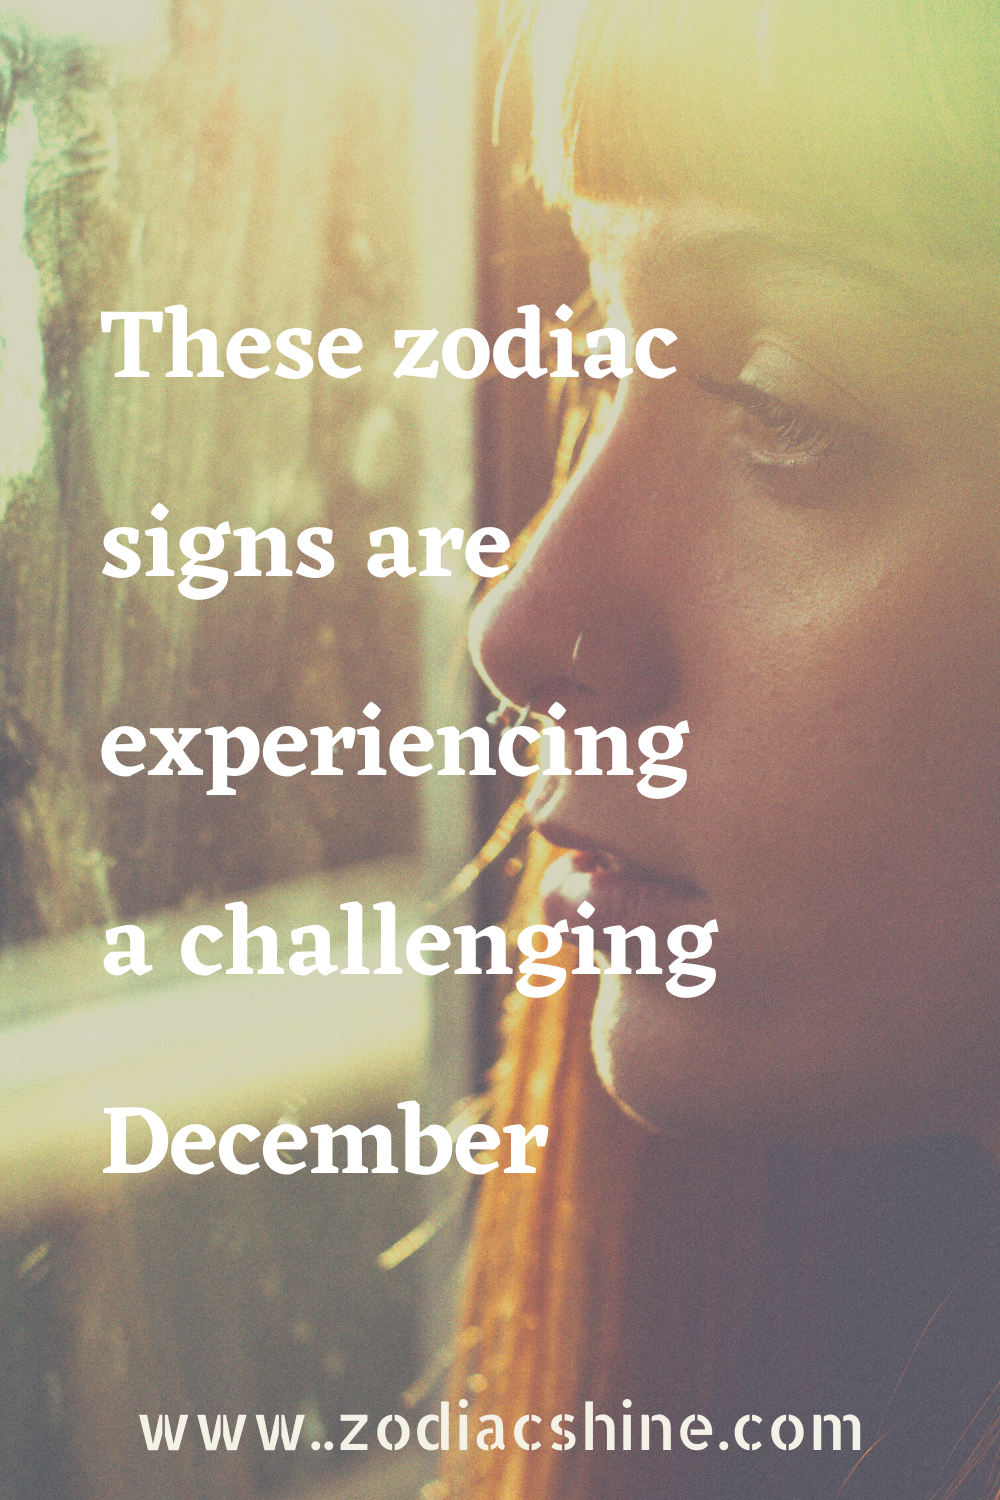 These zodiac signs are experiencing a challenging December